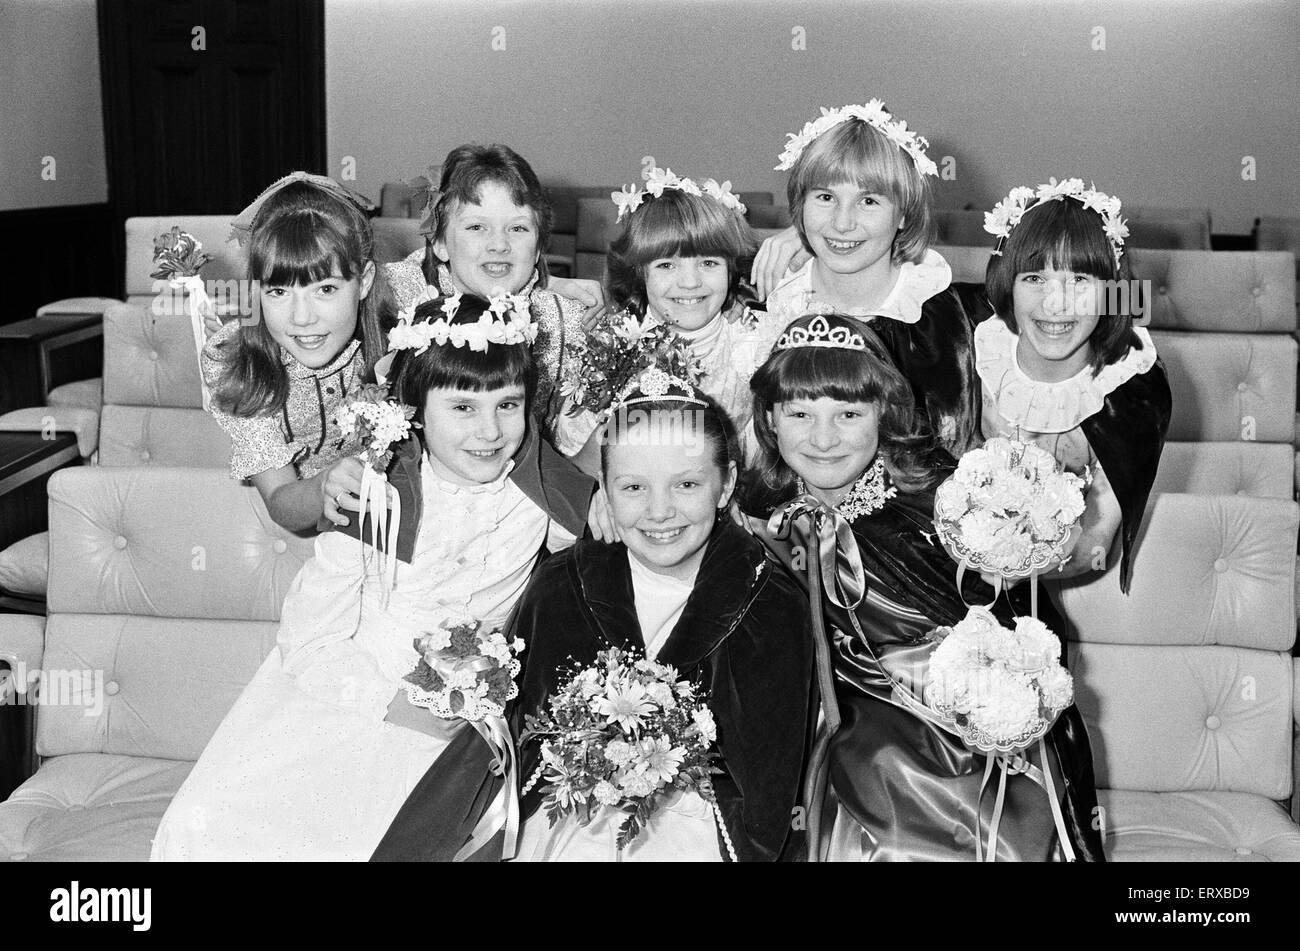 Children festival queens held by national childrens home 1980s 1980s hi ...